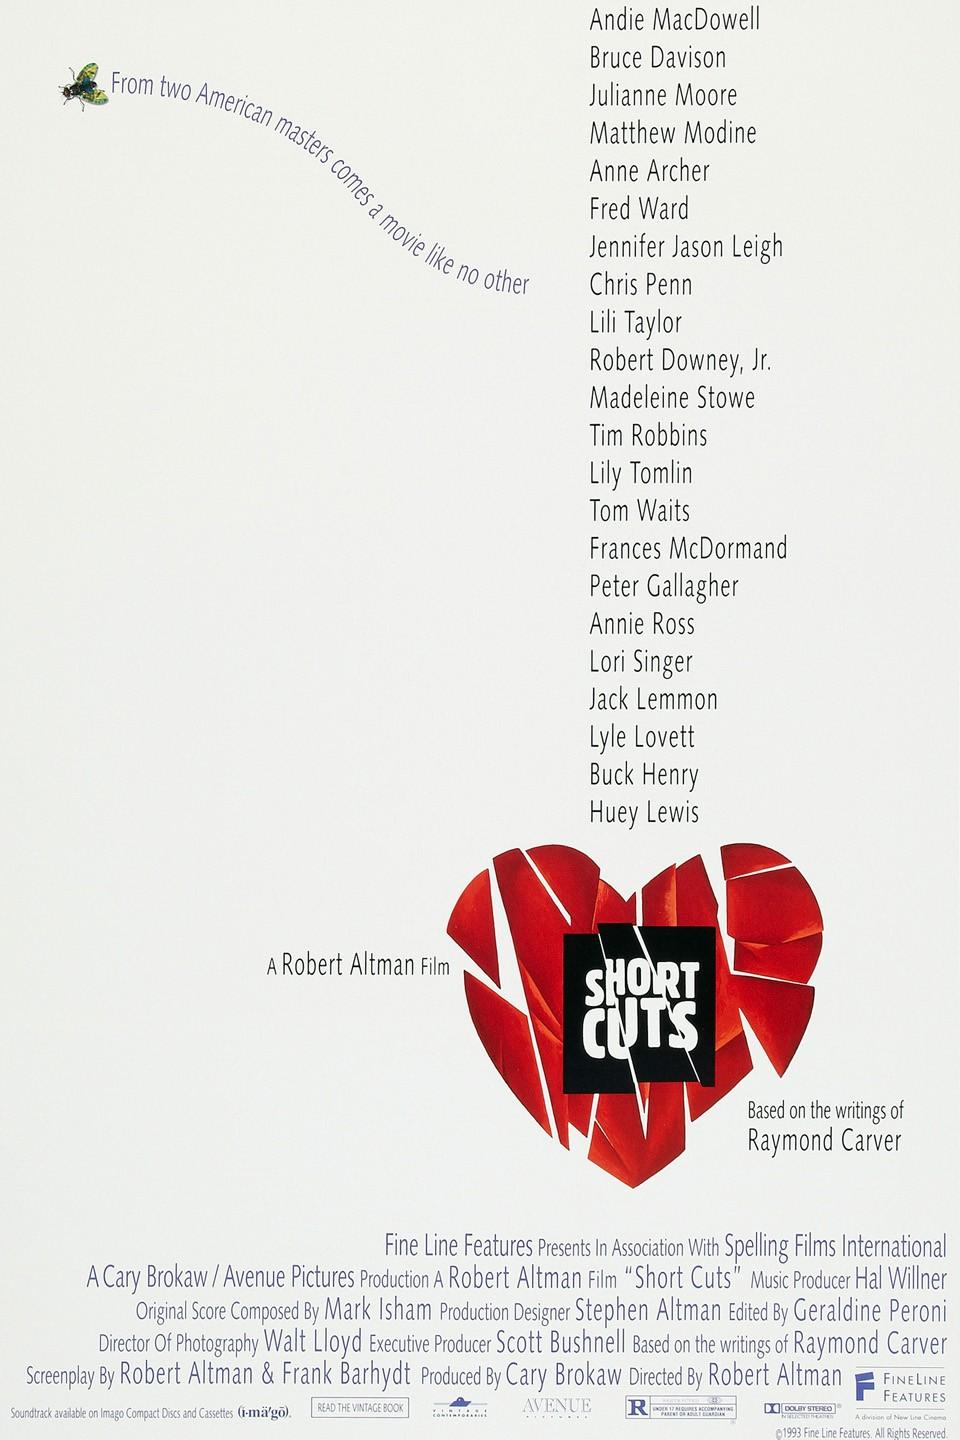 The film poster for 'Short Cuts' featuring a red collaged heart